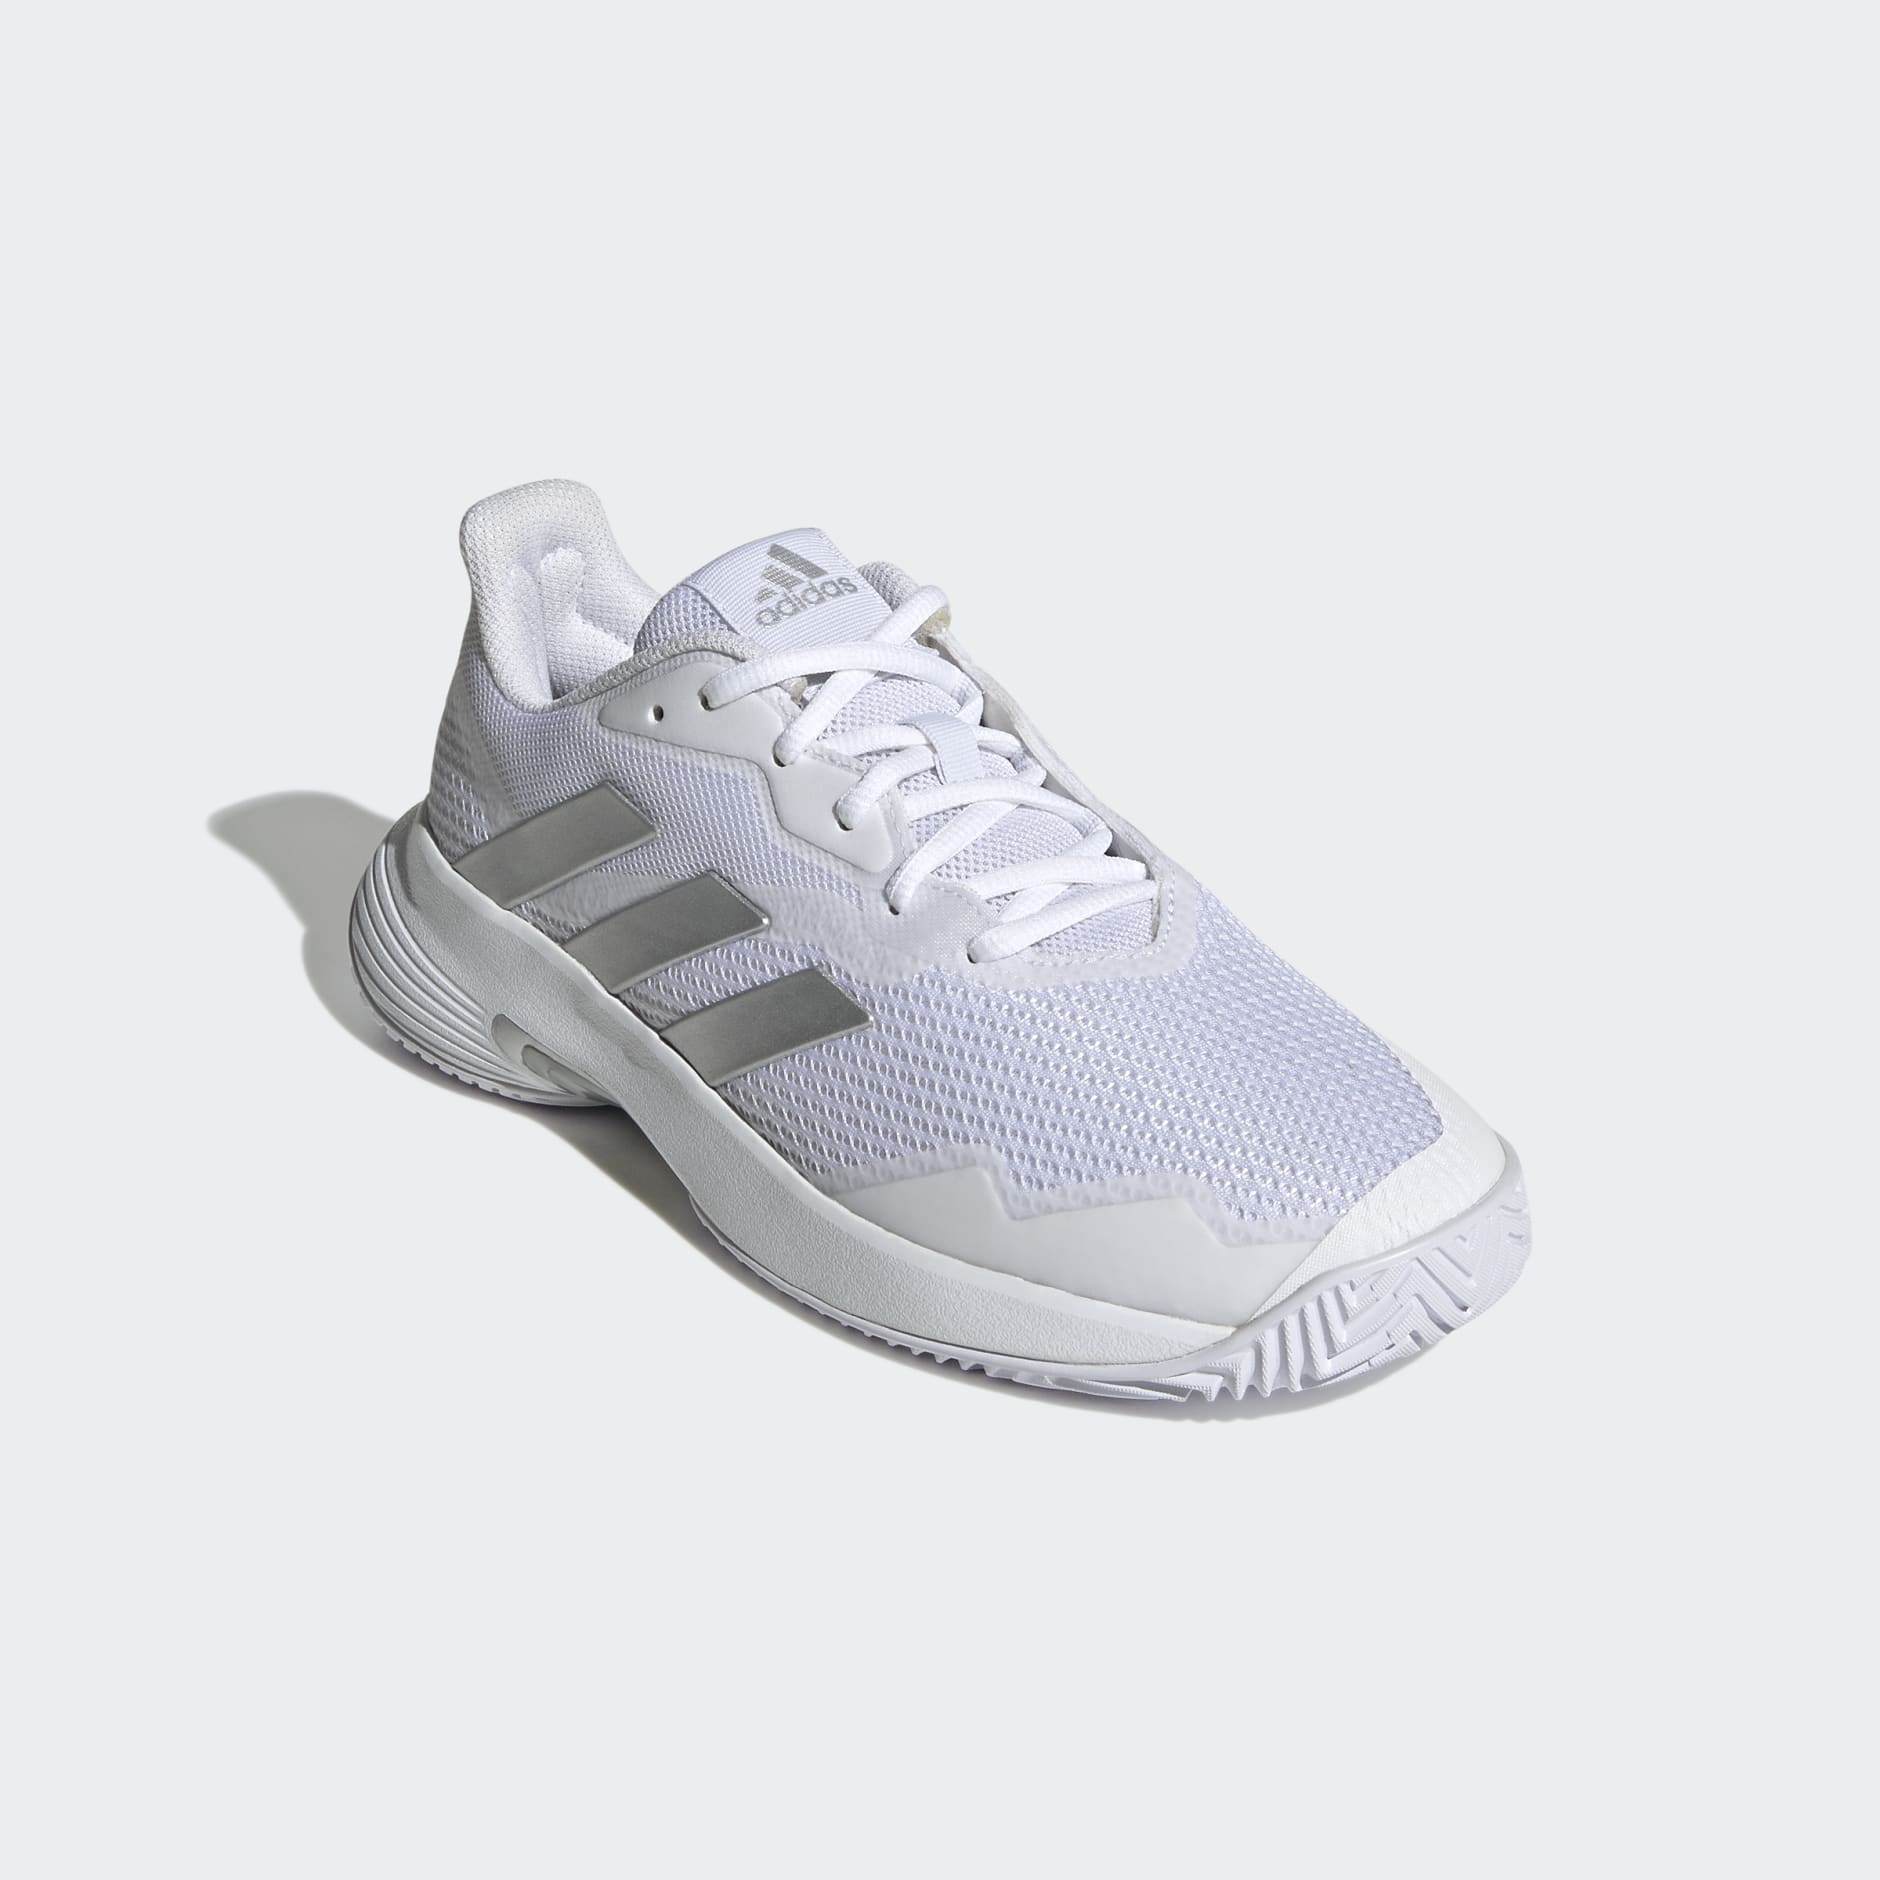 Shoes - Courtjam Control Tennis Shoes - White | adidas South Africa